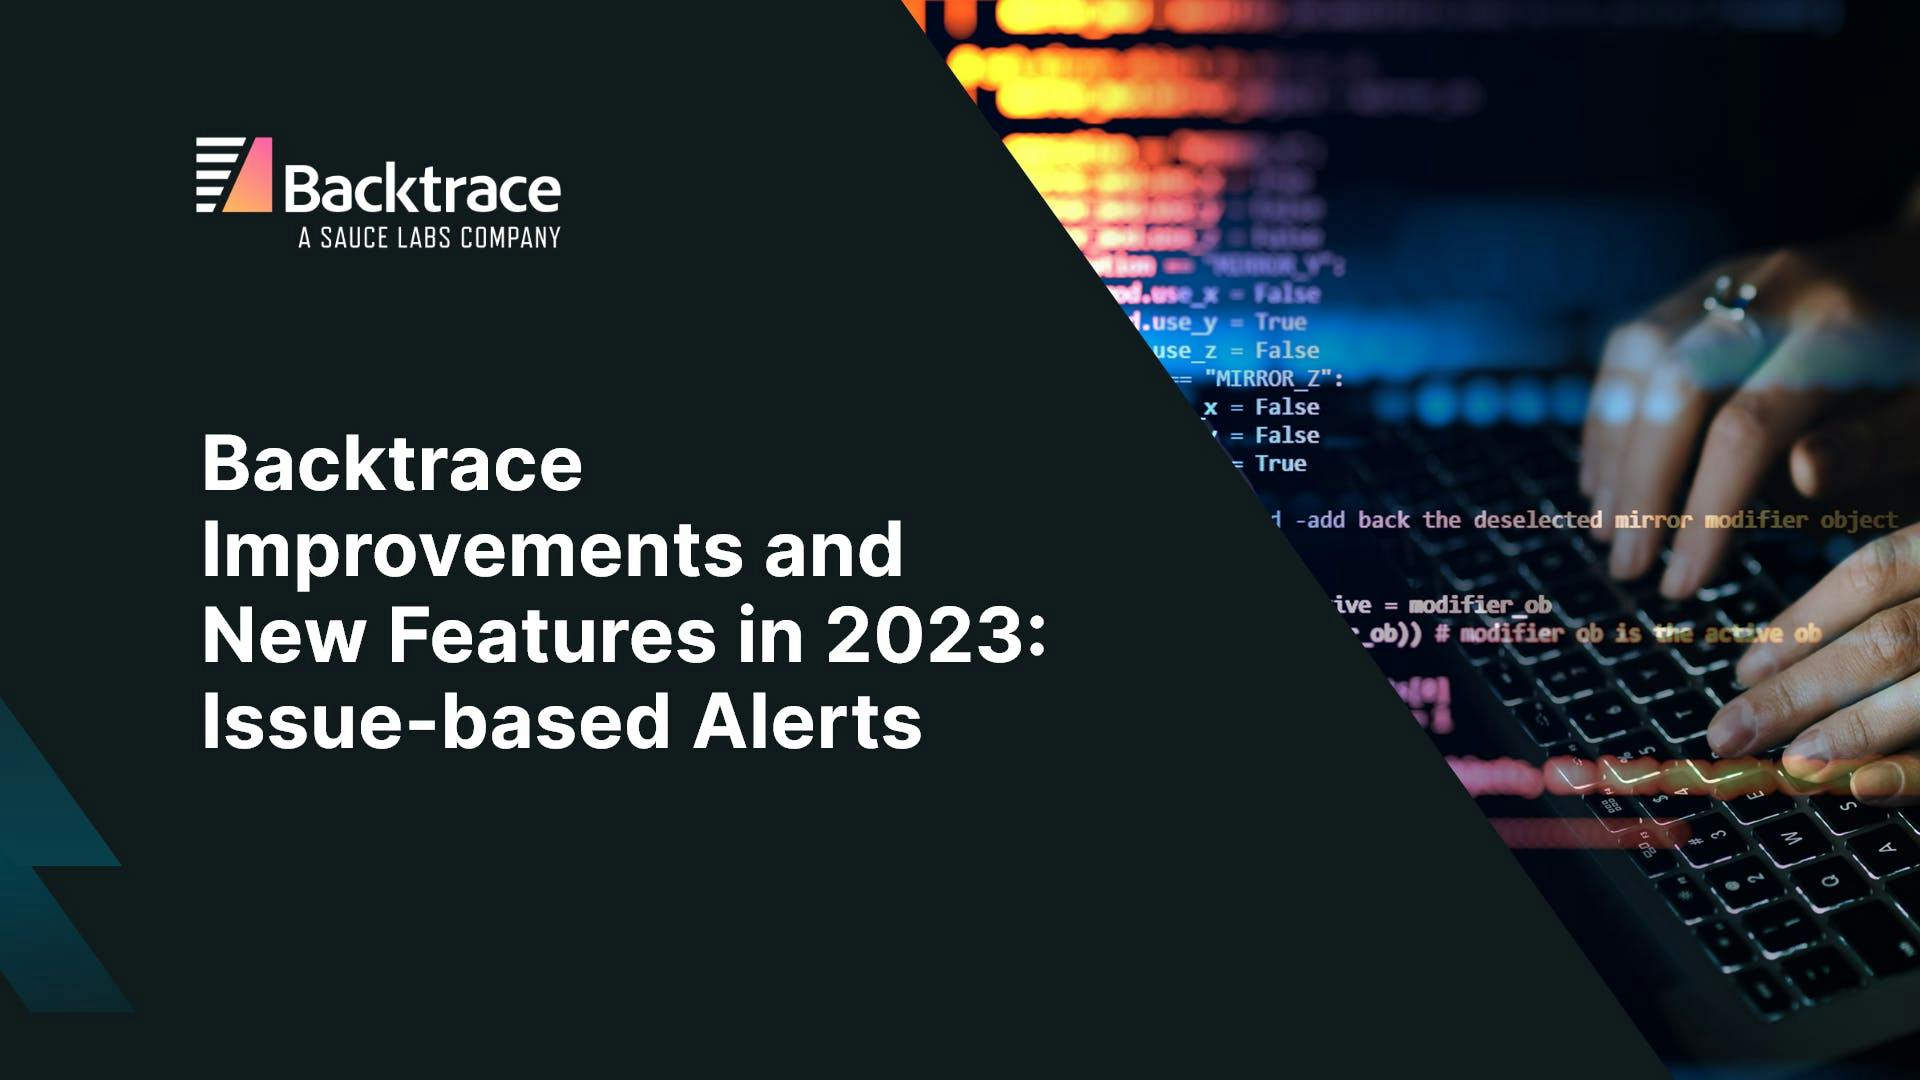 Thumbnail image for blog post: Backtrace Improvements and New Features in 2023: Issue-based Alerts